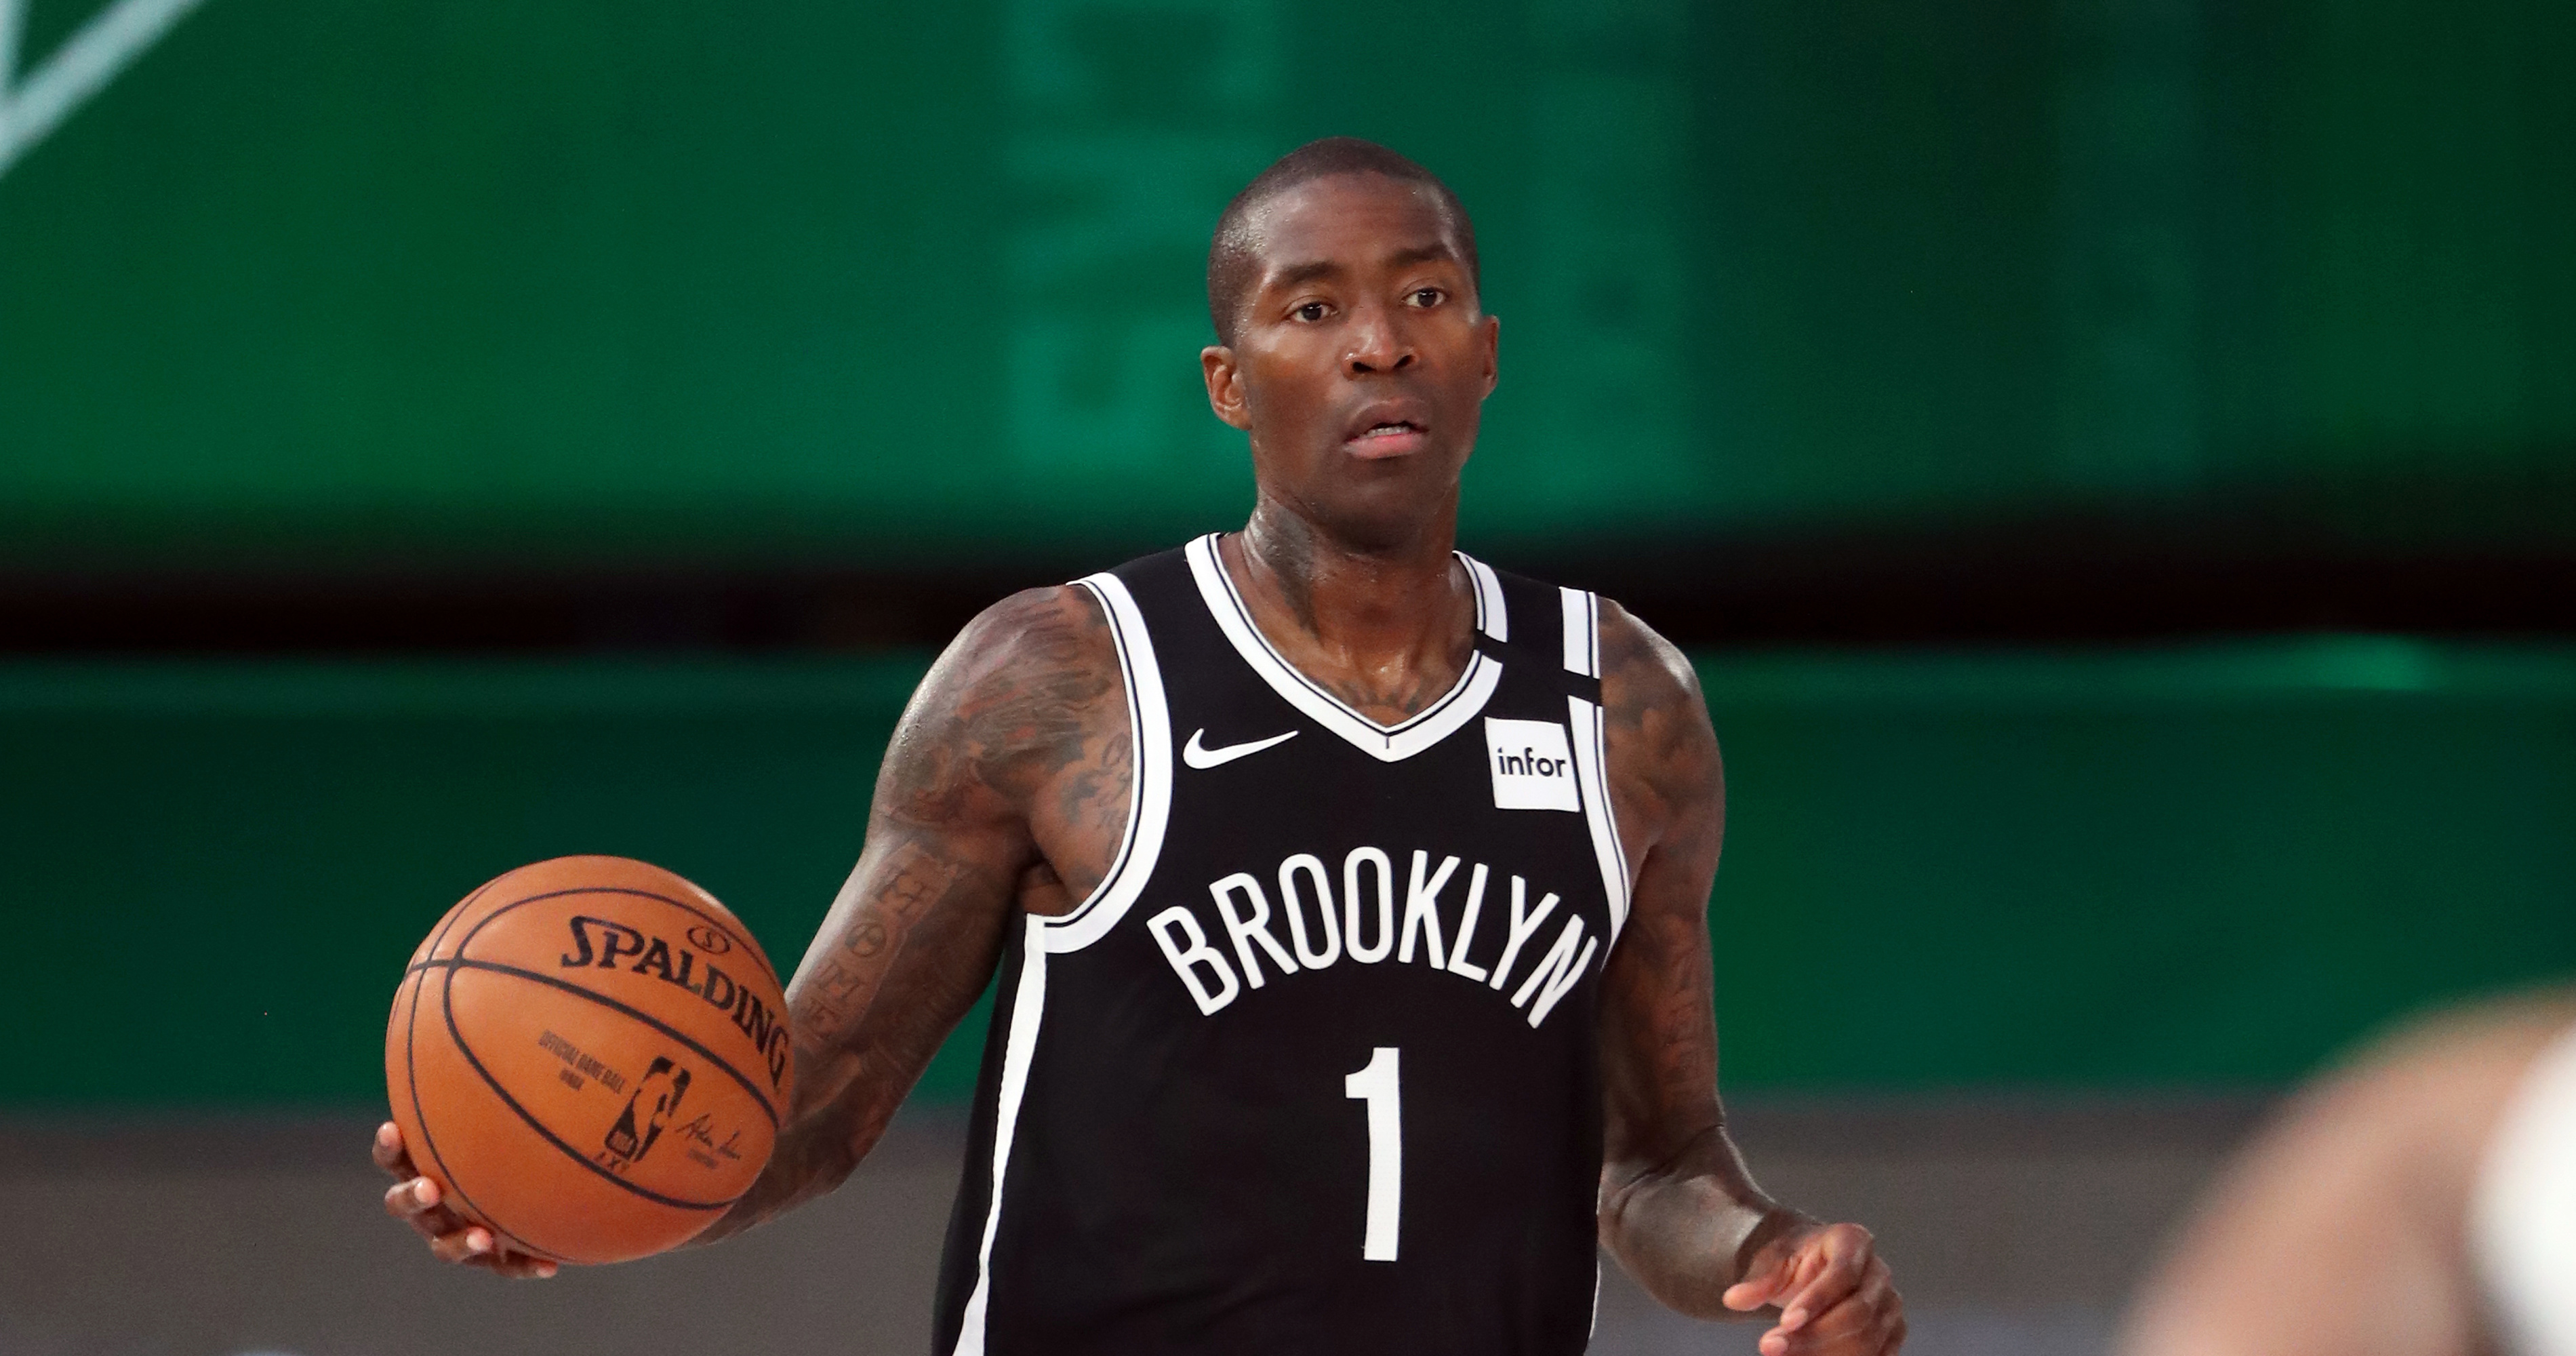 Jamal Crawford Shares his Favorite NBA Memories and Hopes for the